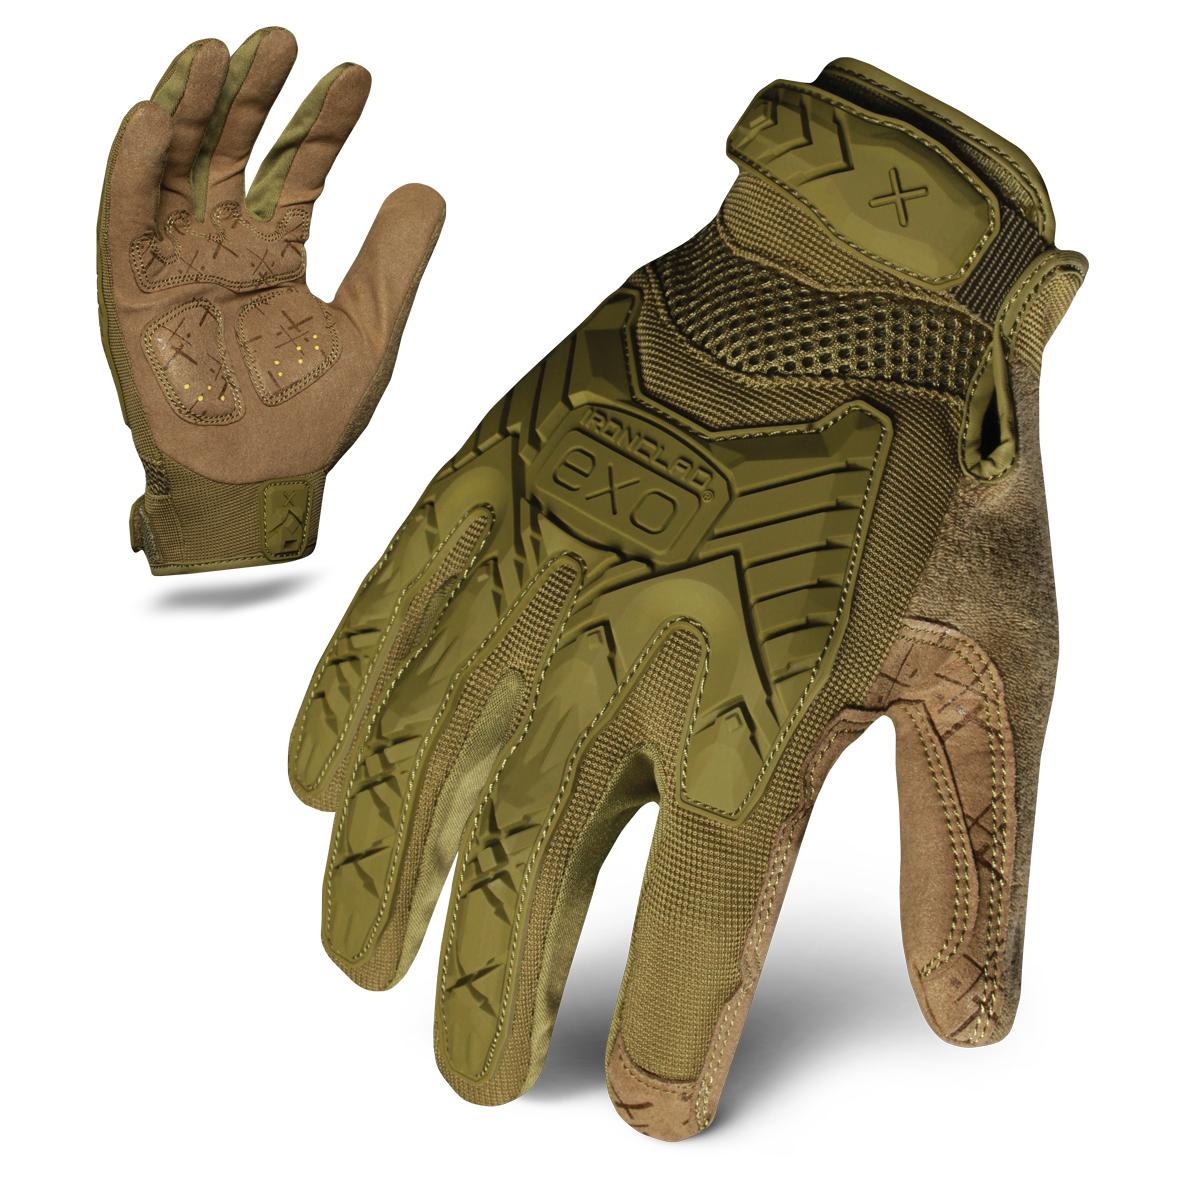 Ironclad EXOT-I Tactical Impact Gloves - OD GREEN